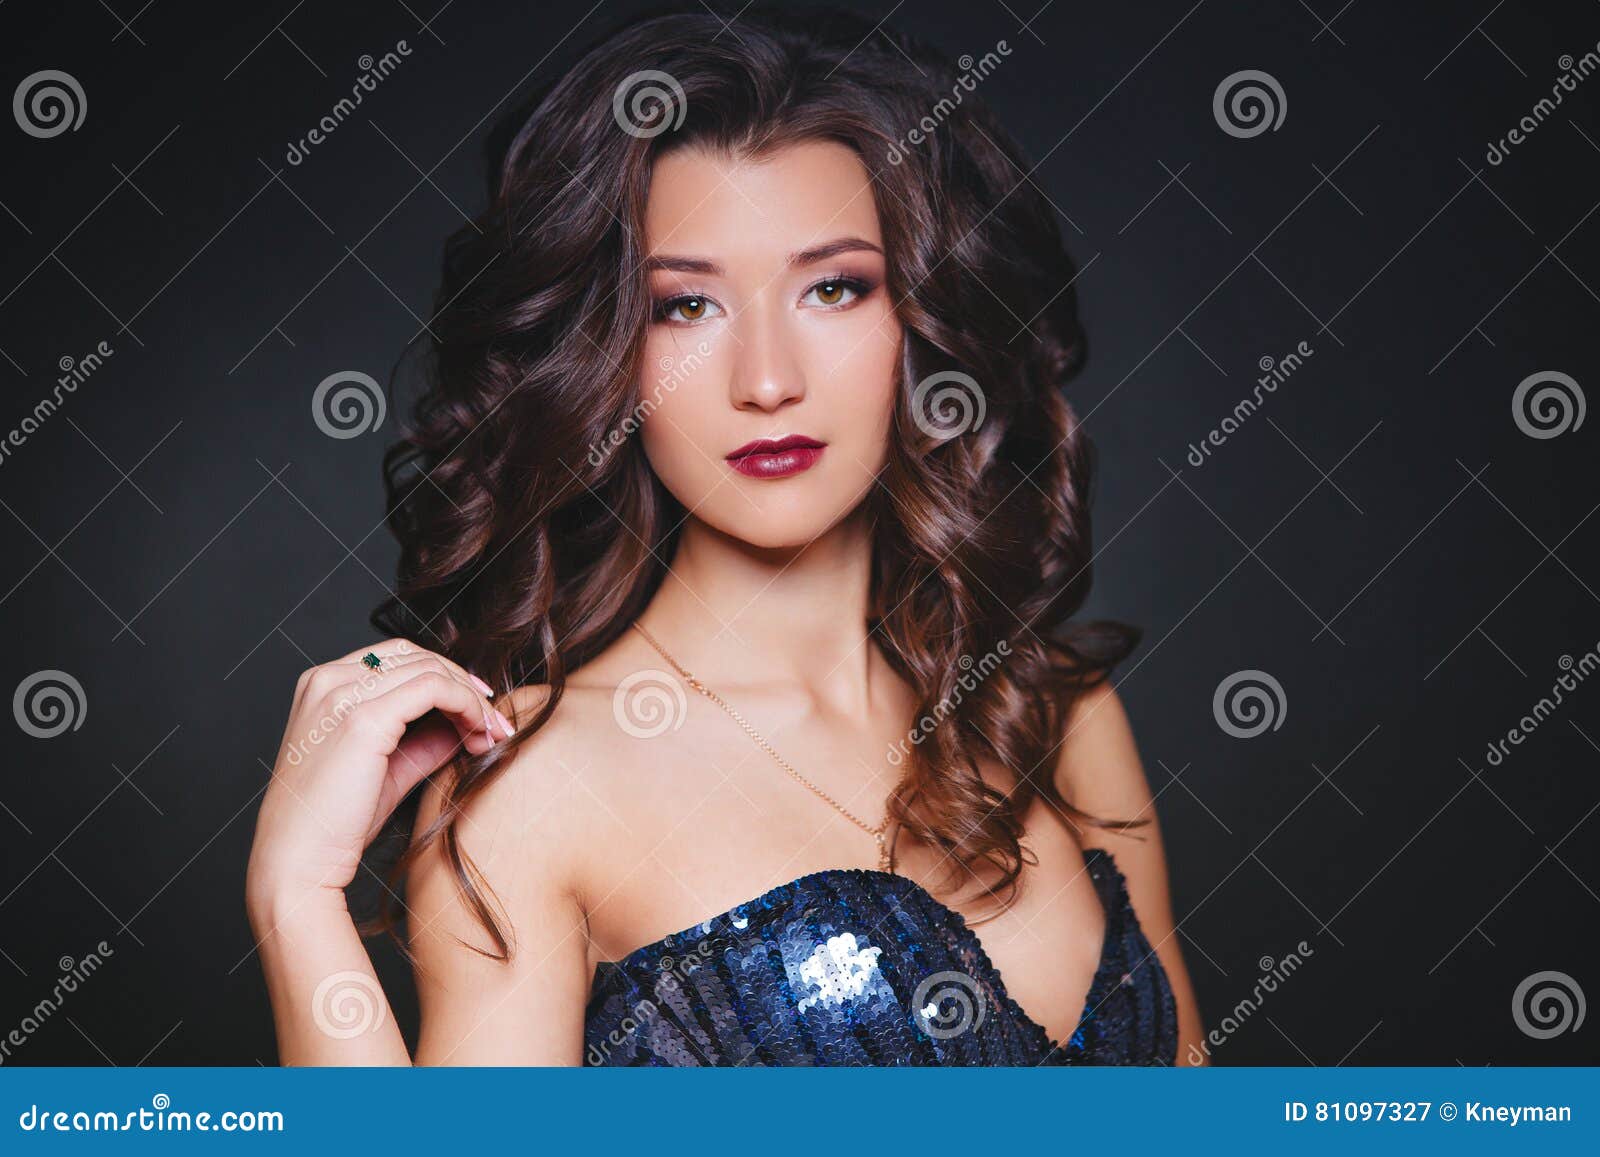 Perfect Make Up And Hairstyle Portrait Of Beautiful Curly Brunette Woman Stock Image Image Of